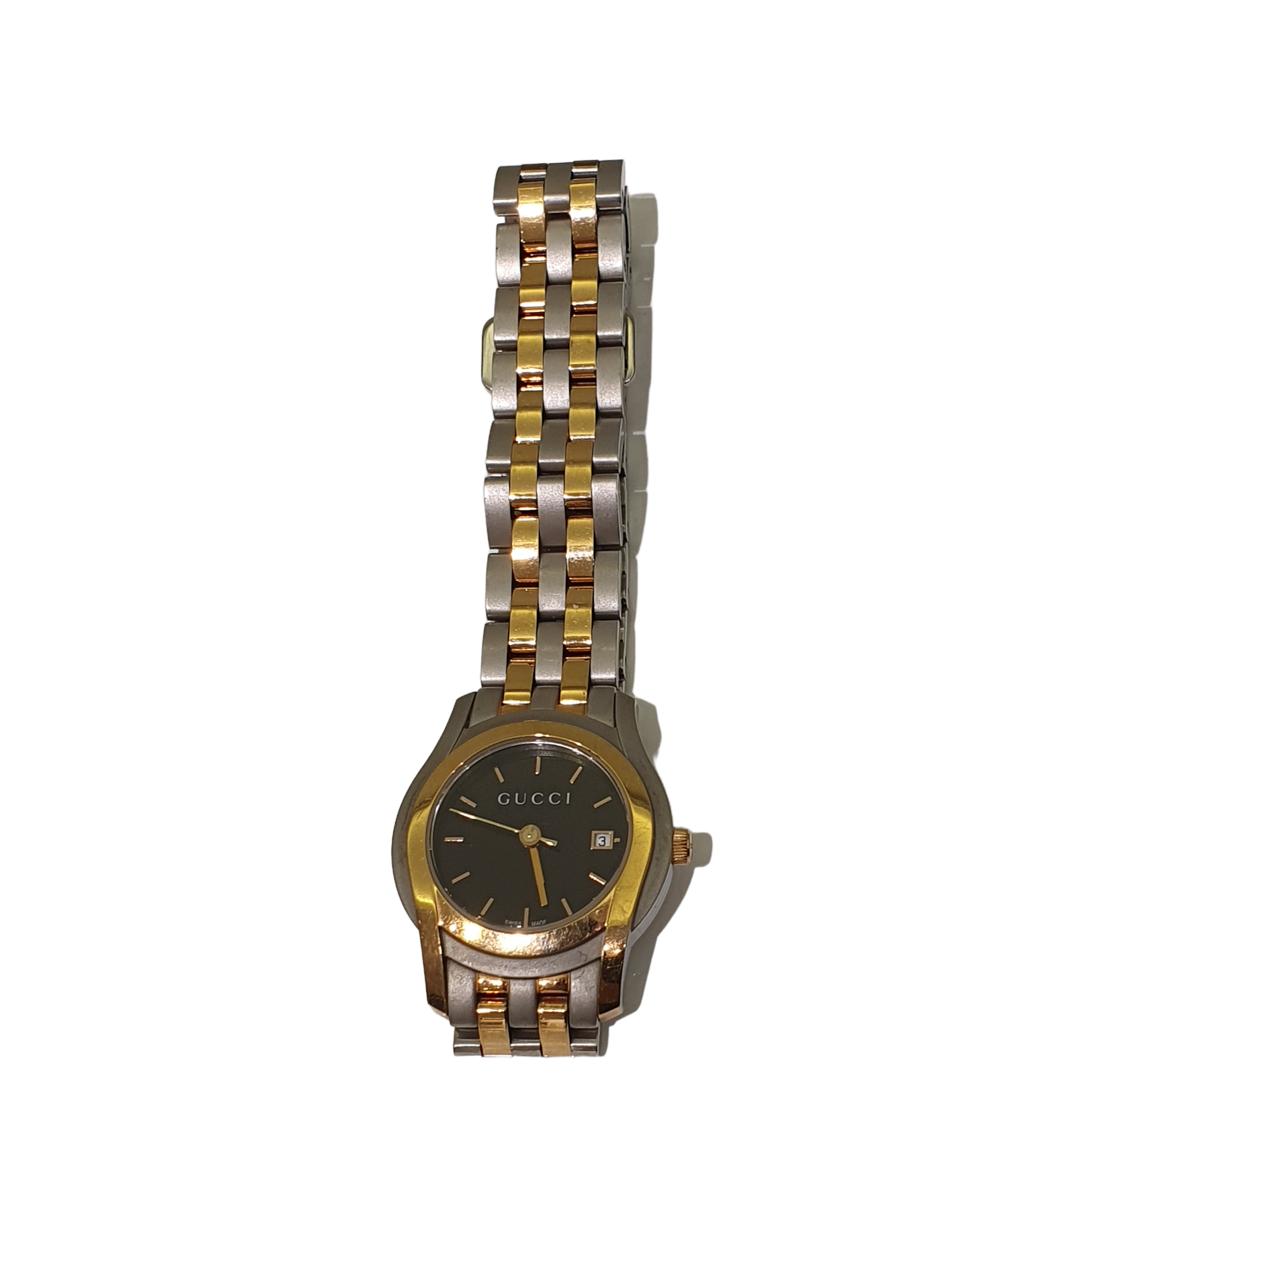 Gucci ST.ST Water Resistant Watch